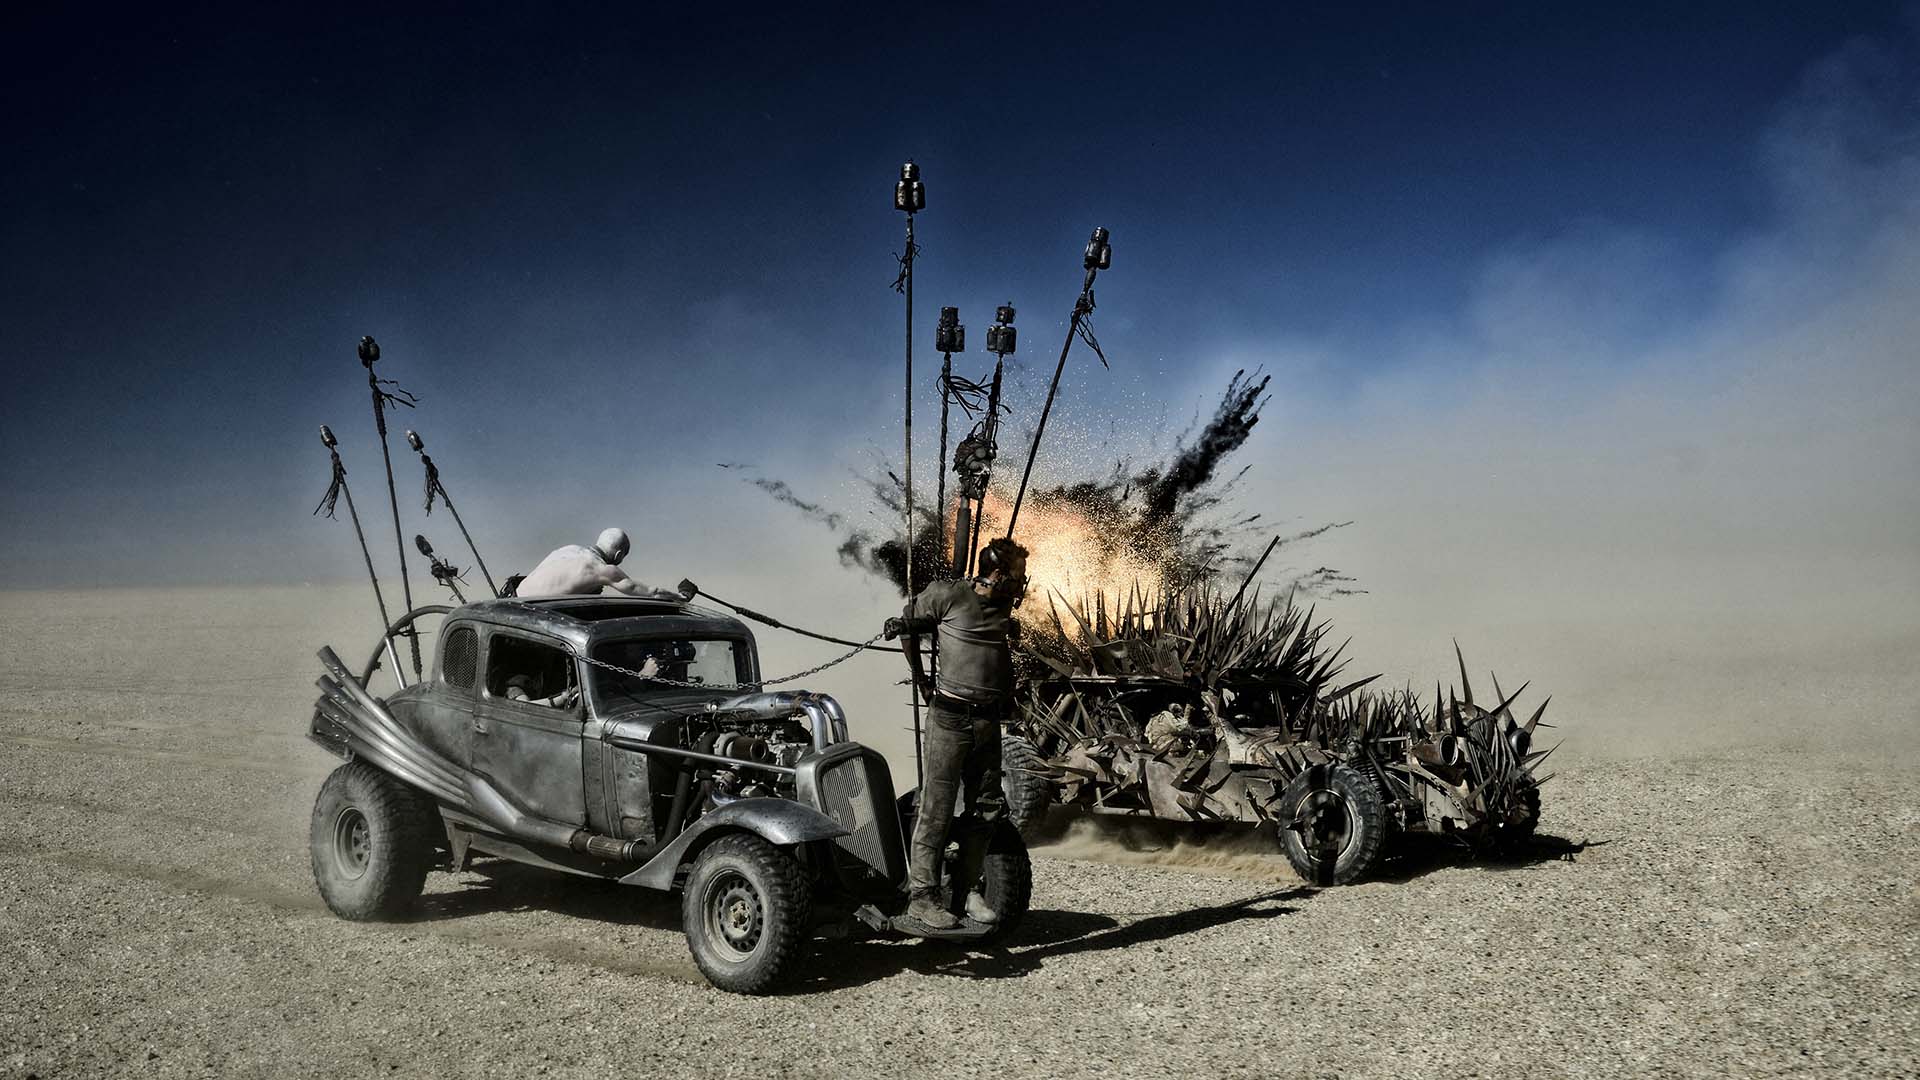 The Cars From 'Mad Max: Fury Road' Are Up for Auction If You Need a Shiny and Chrome New Ride